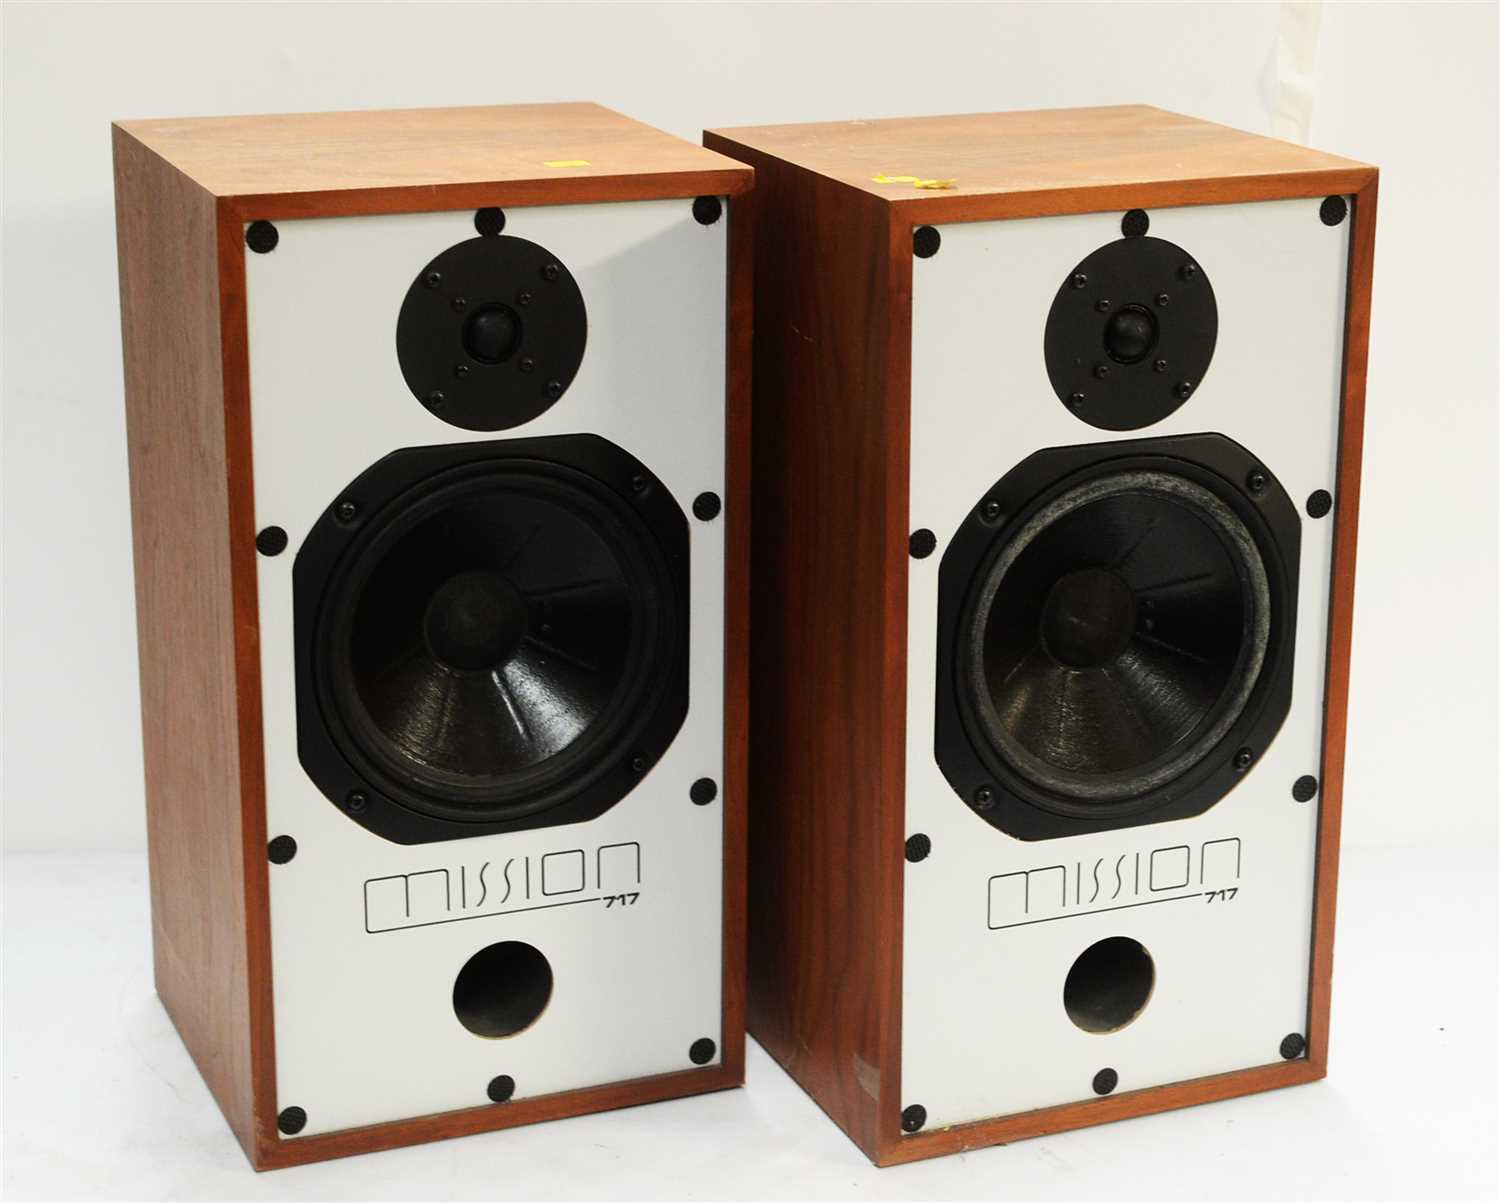 Lot 55 - Pair of Mission 717 hi-fi speakers; and two pairs of floor stands.